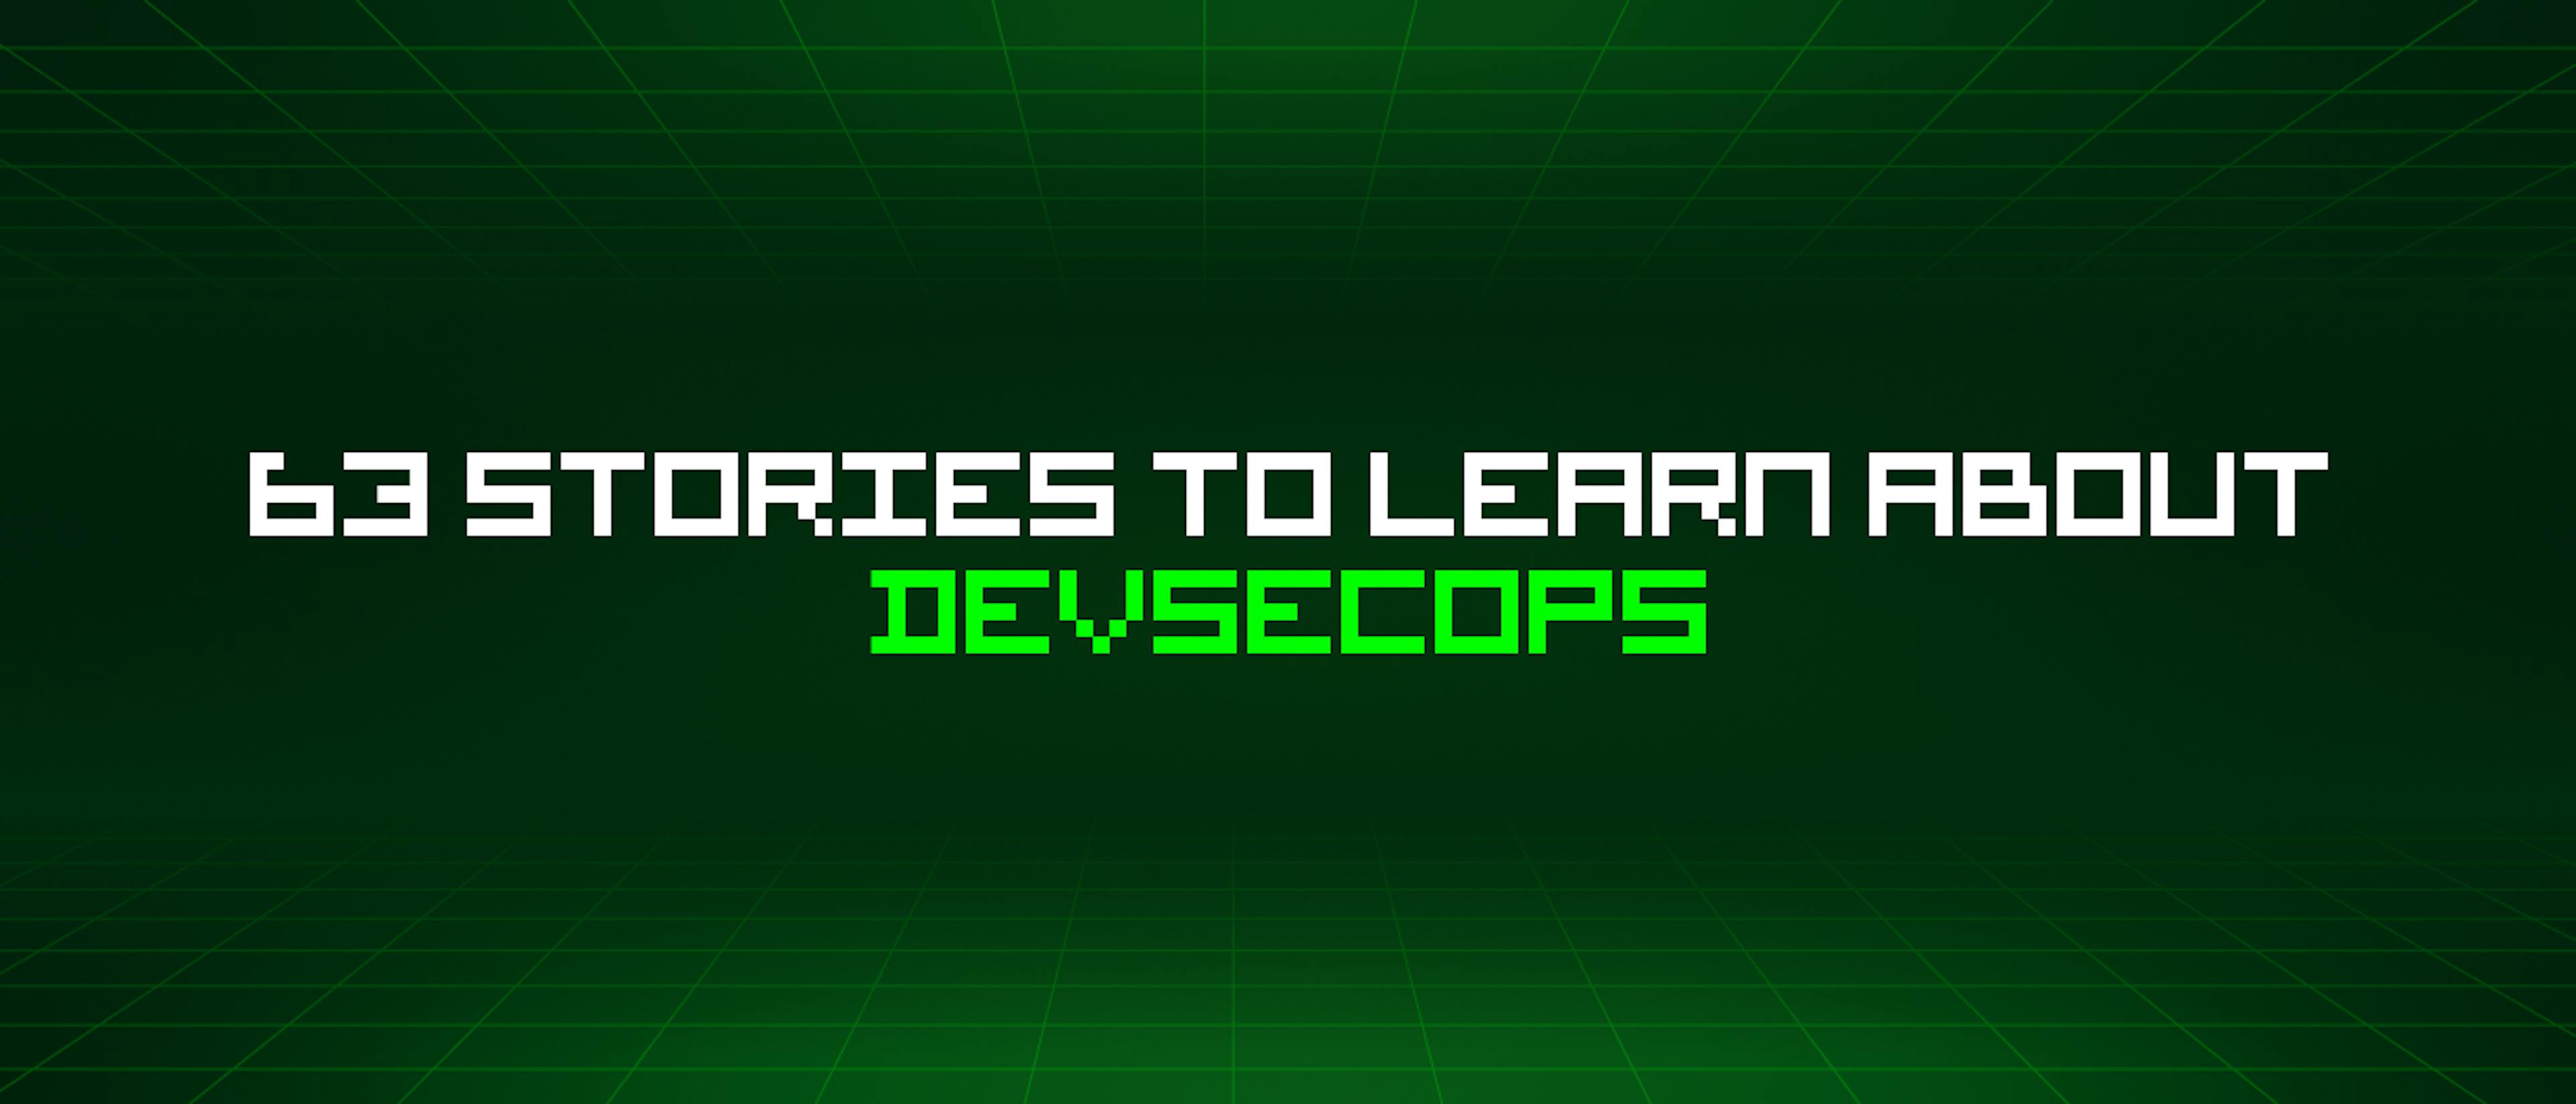 featured image - 63 Stories To Learn About Devsecops